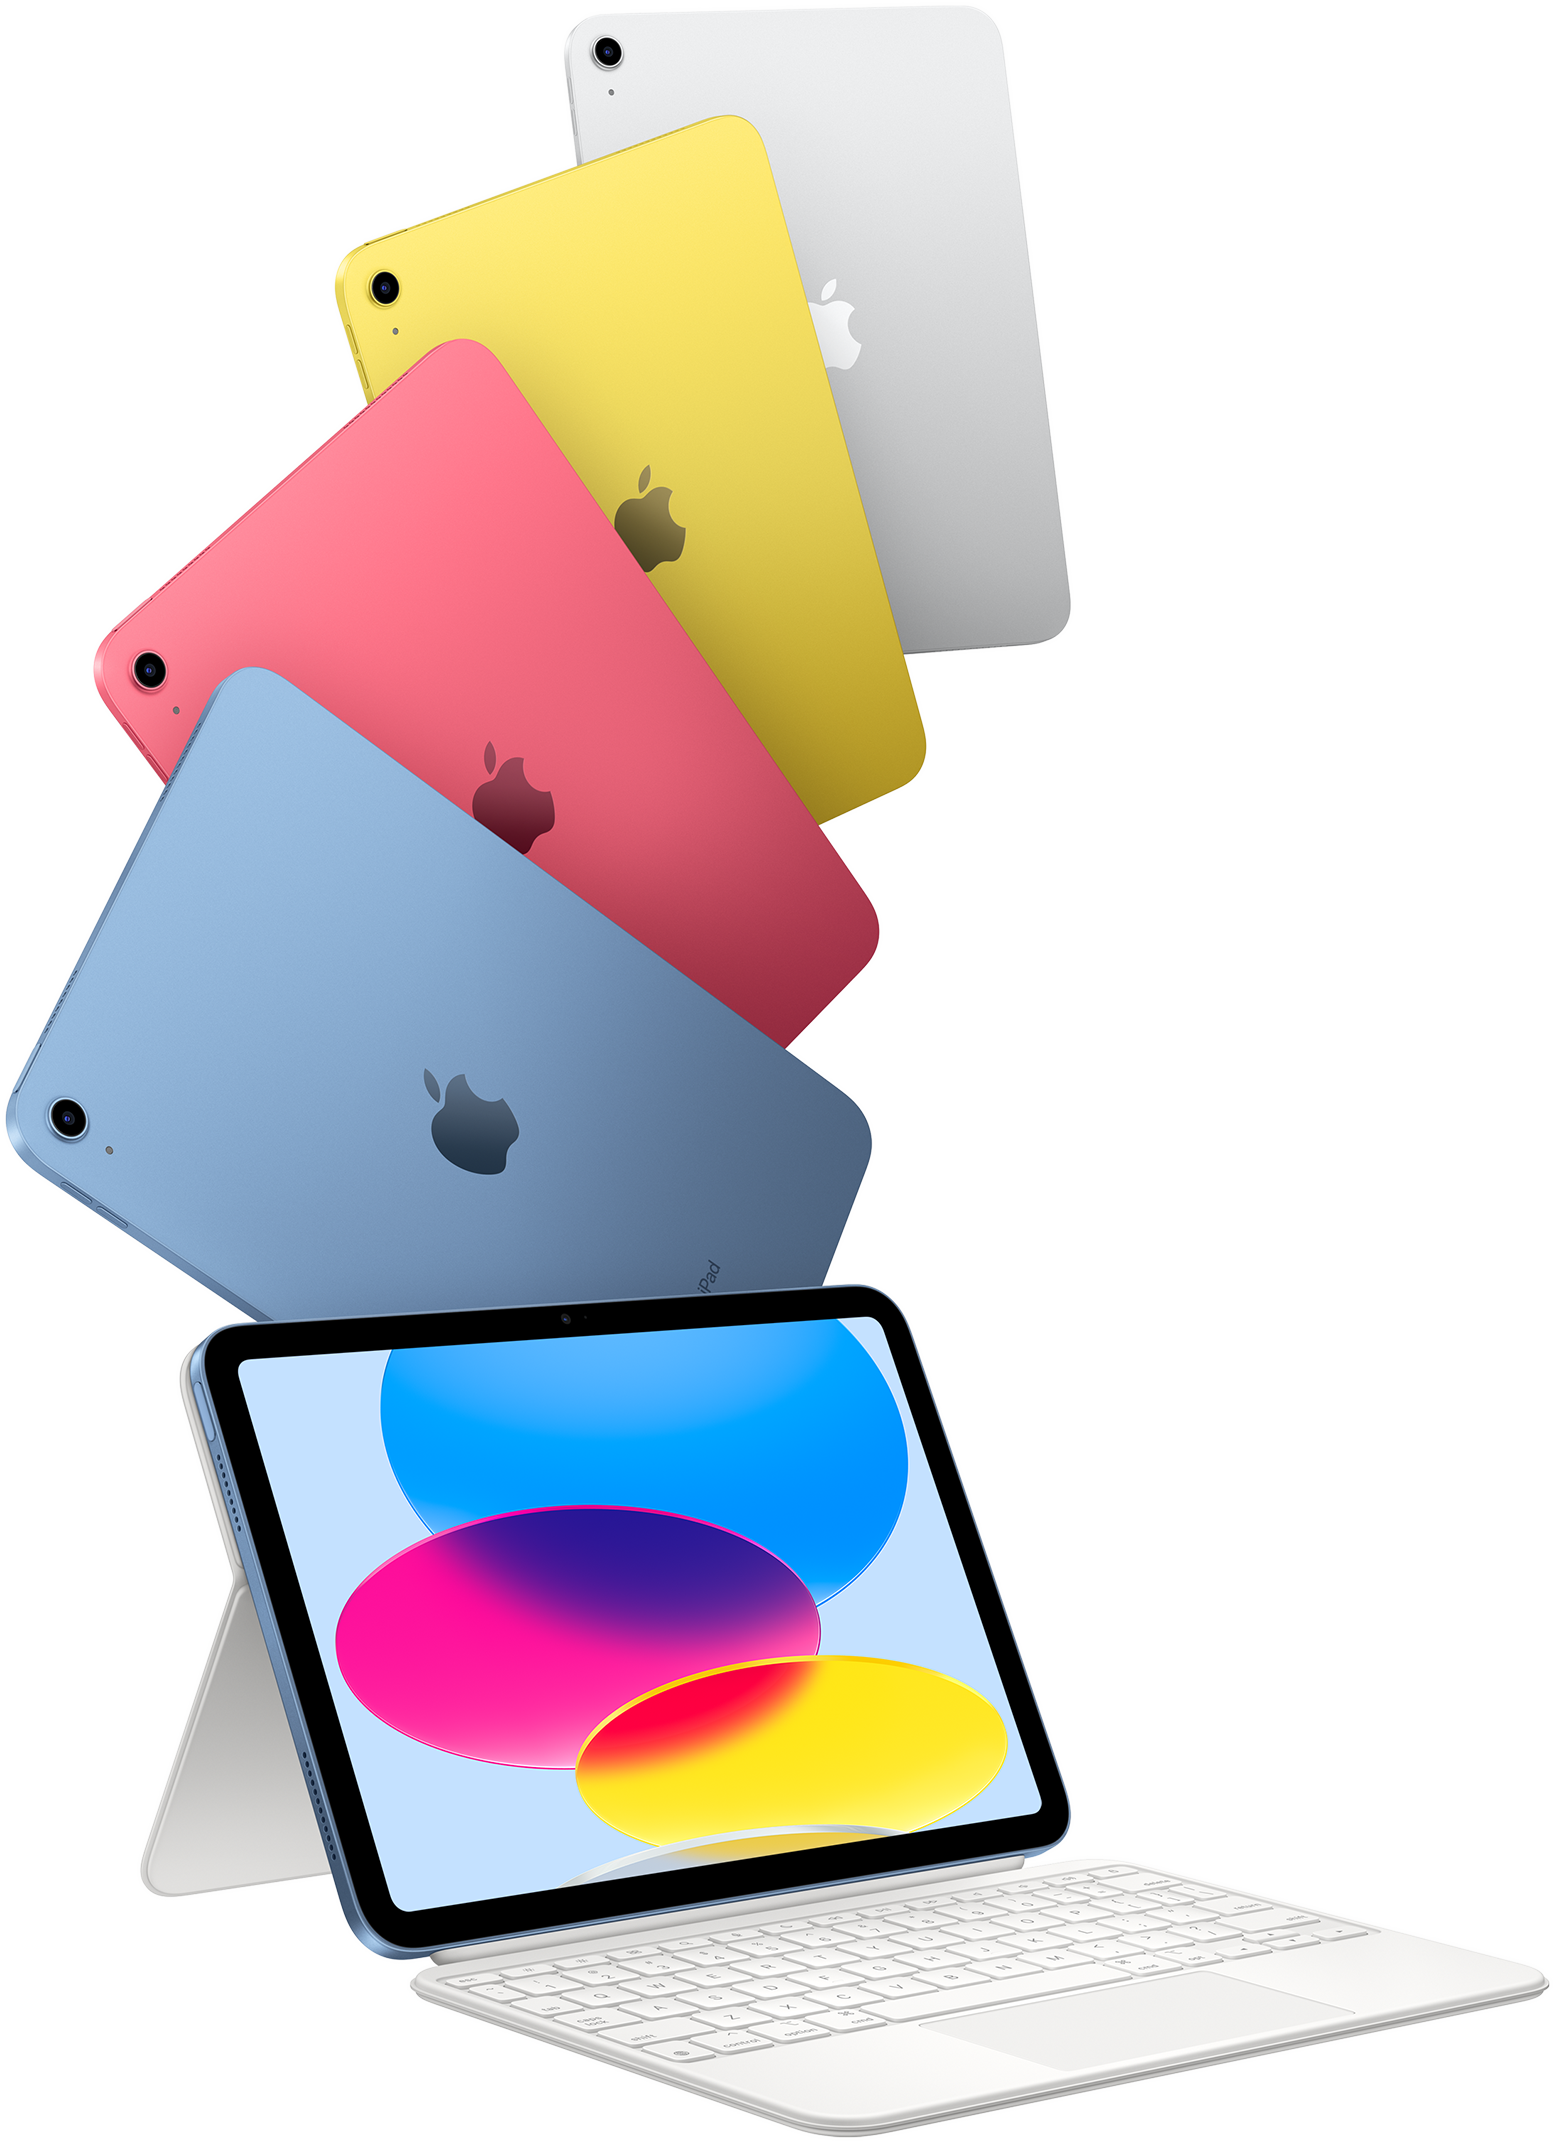 iPad in blue, pink, yellow and silver colours, and one iPad attached to the Magic Keyboard Folio.